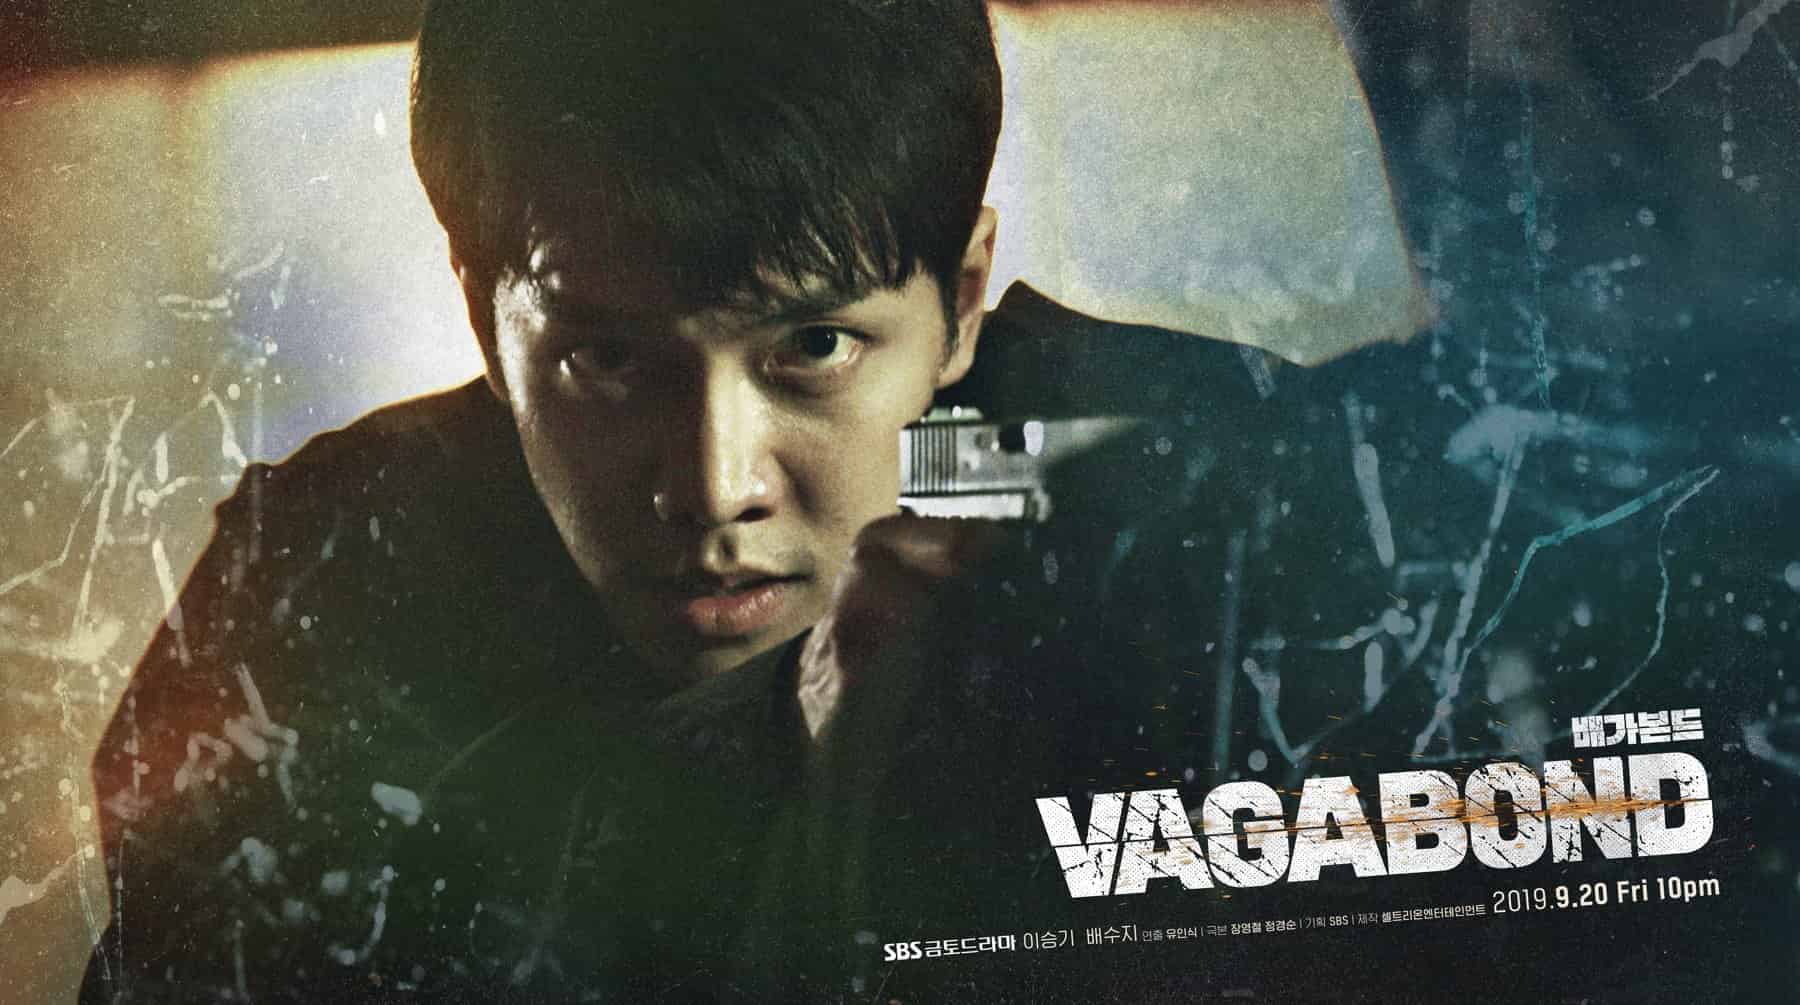 Vagabond - Cast, Summary, Synopsis, OST, Episode, Review